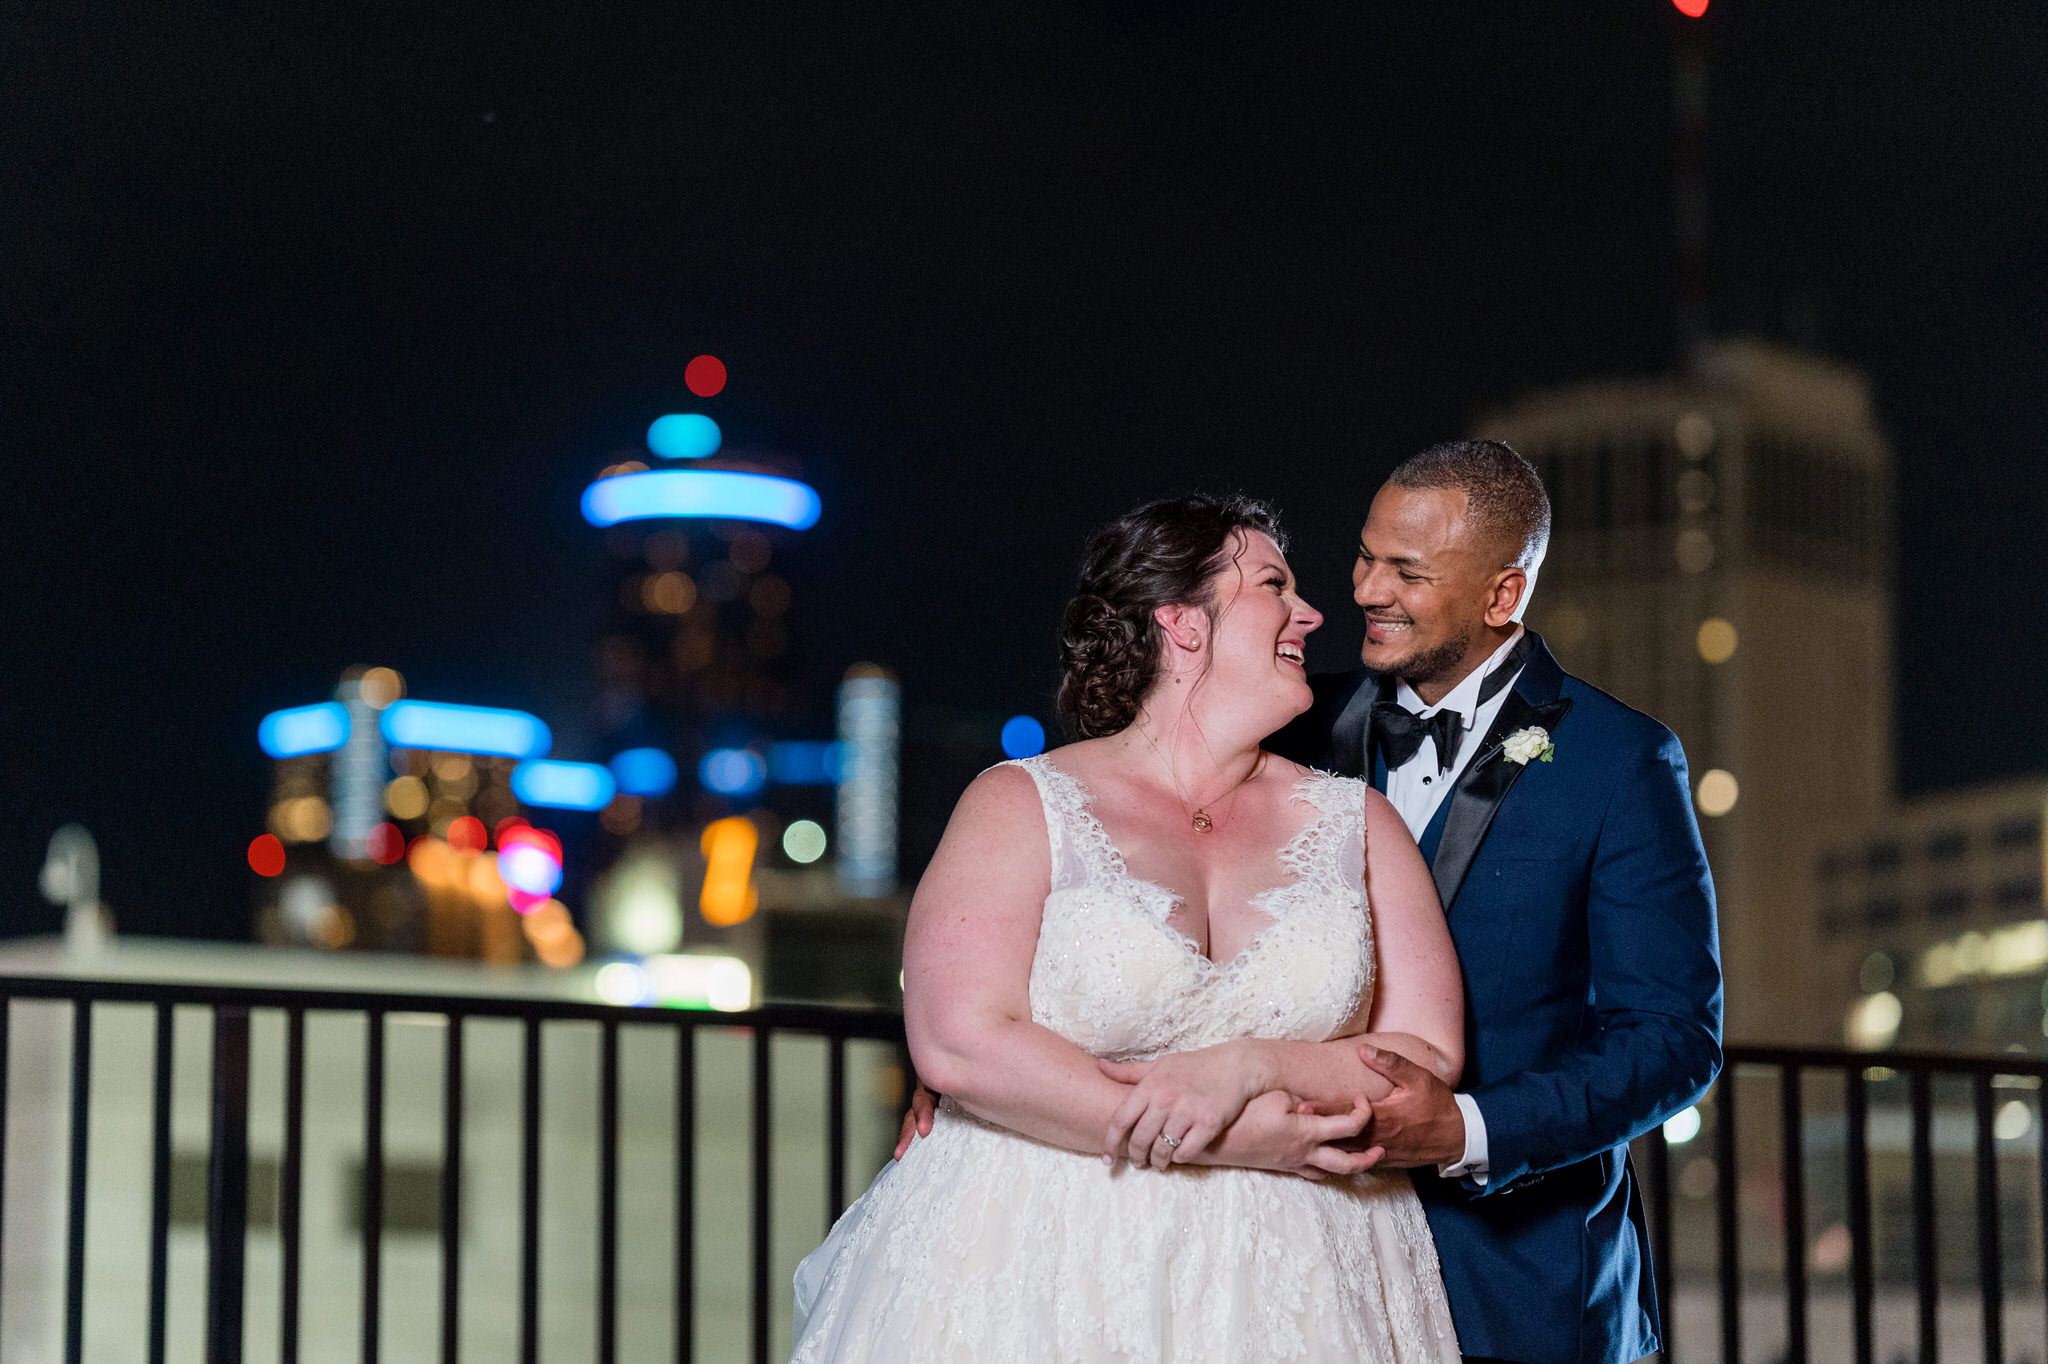 A nighttime photo of a groom hugging a bride from behind with the GM building in the background